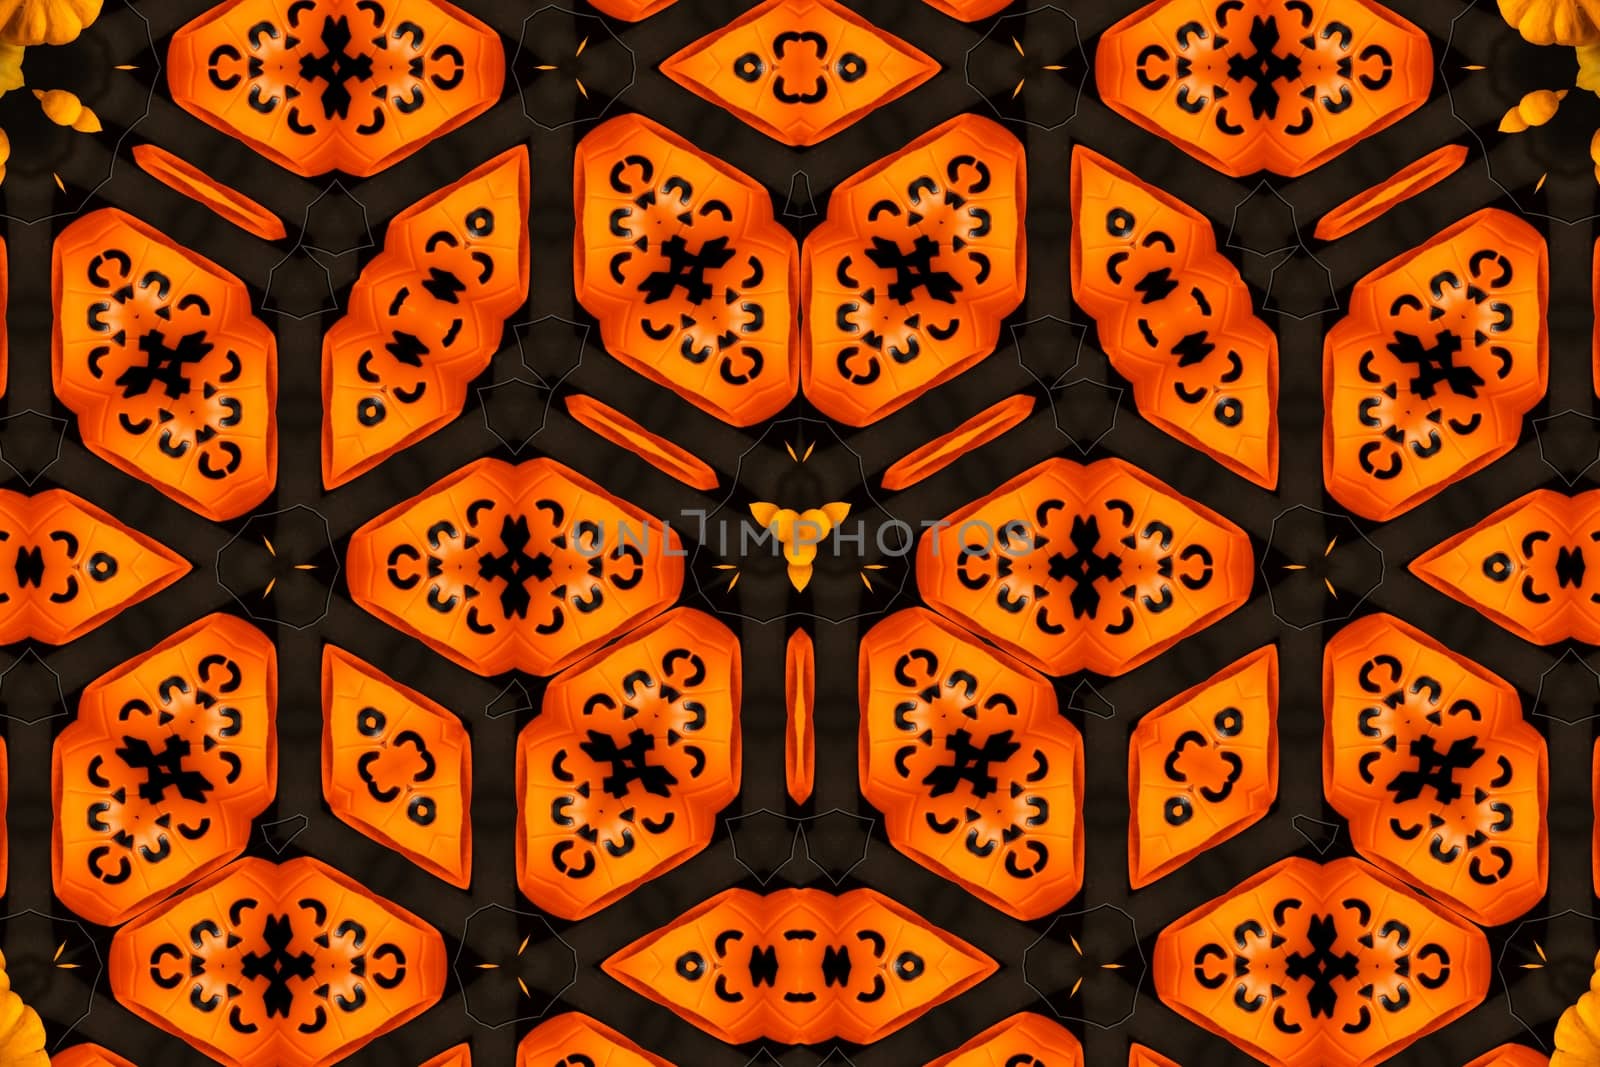 The abstract multicolor texture strange kaleidoscope background with orange and black color